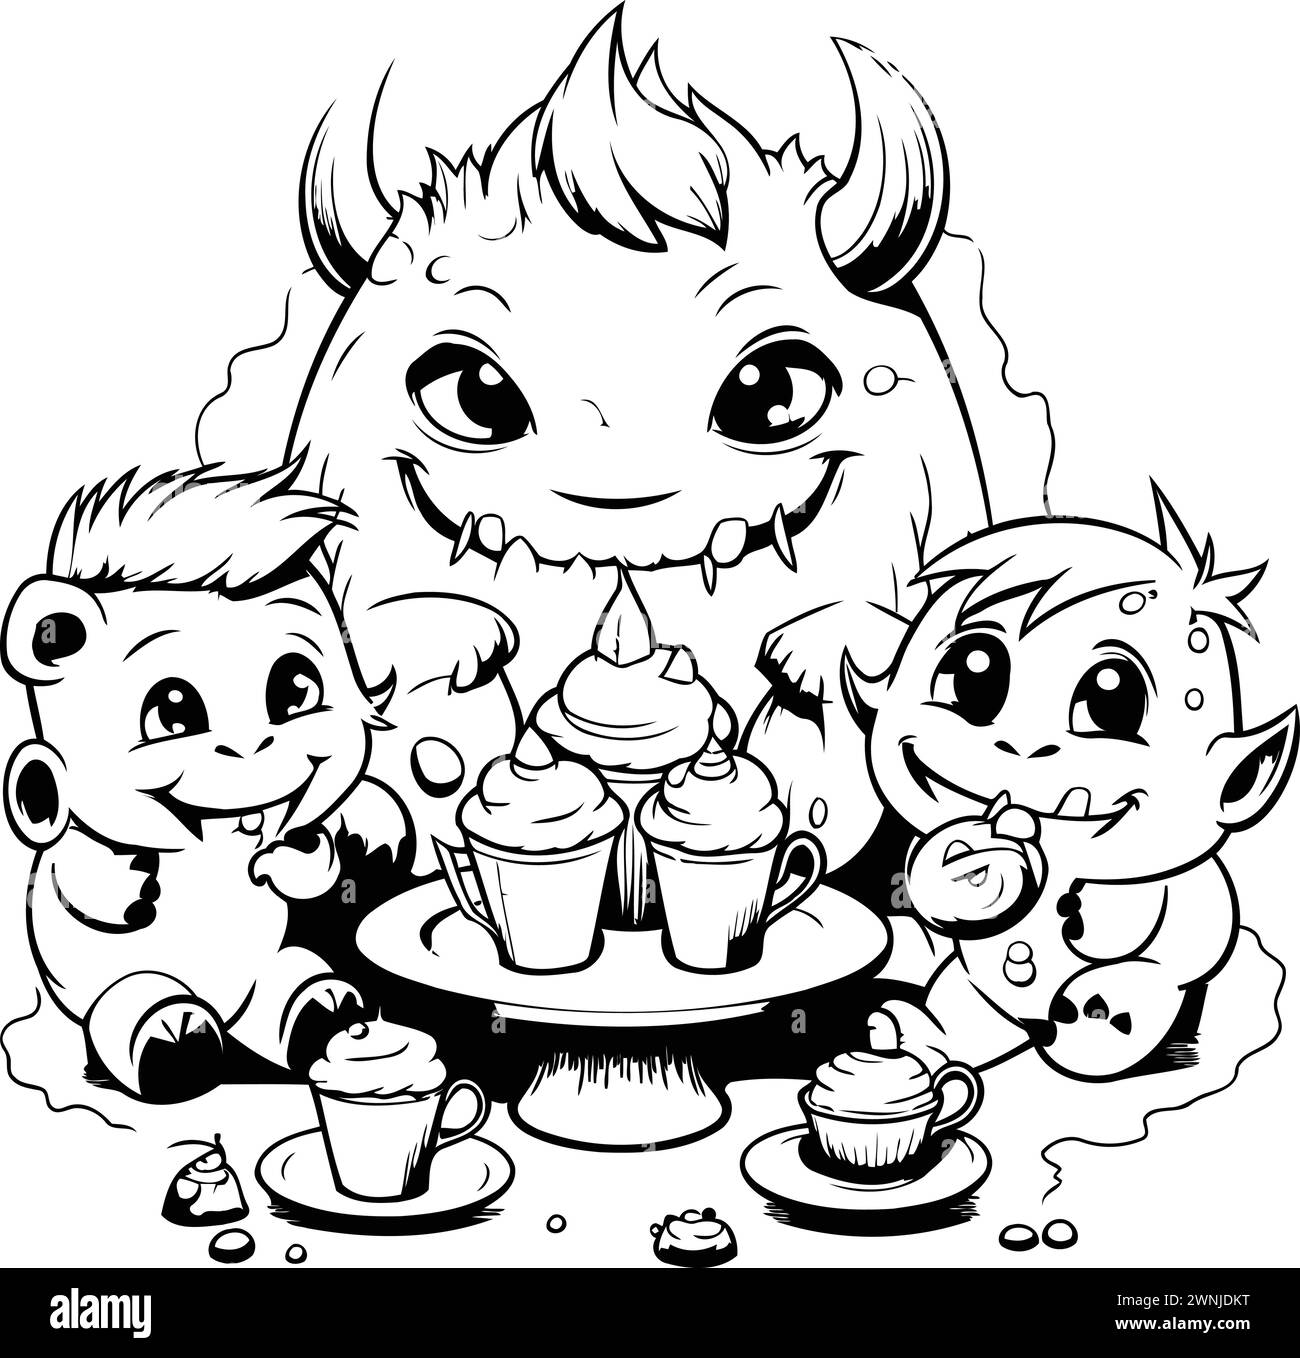 Black and White Cartoon Illustration of Devil and Monsters Eating Cake for Coloring Book Stock Vector